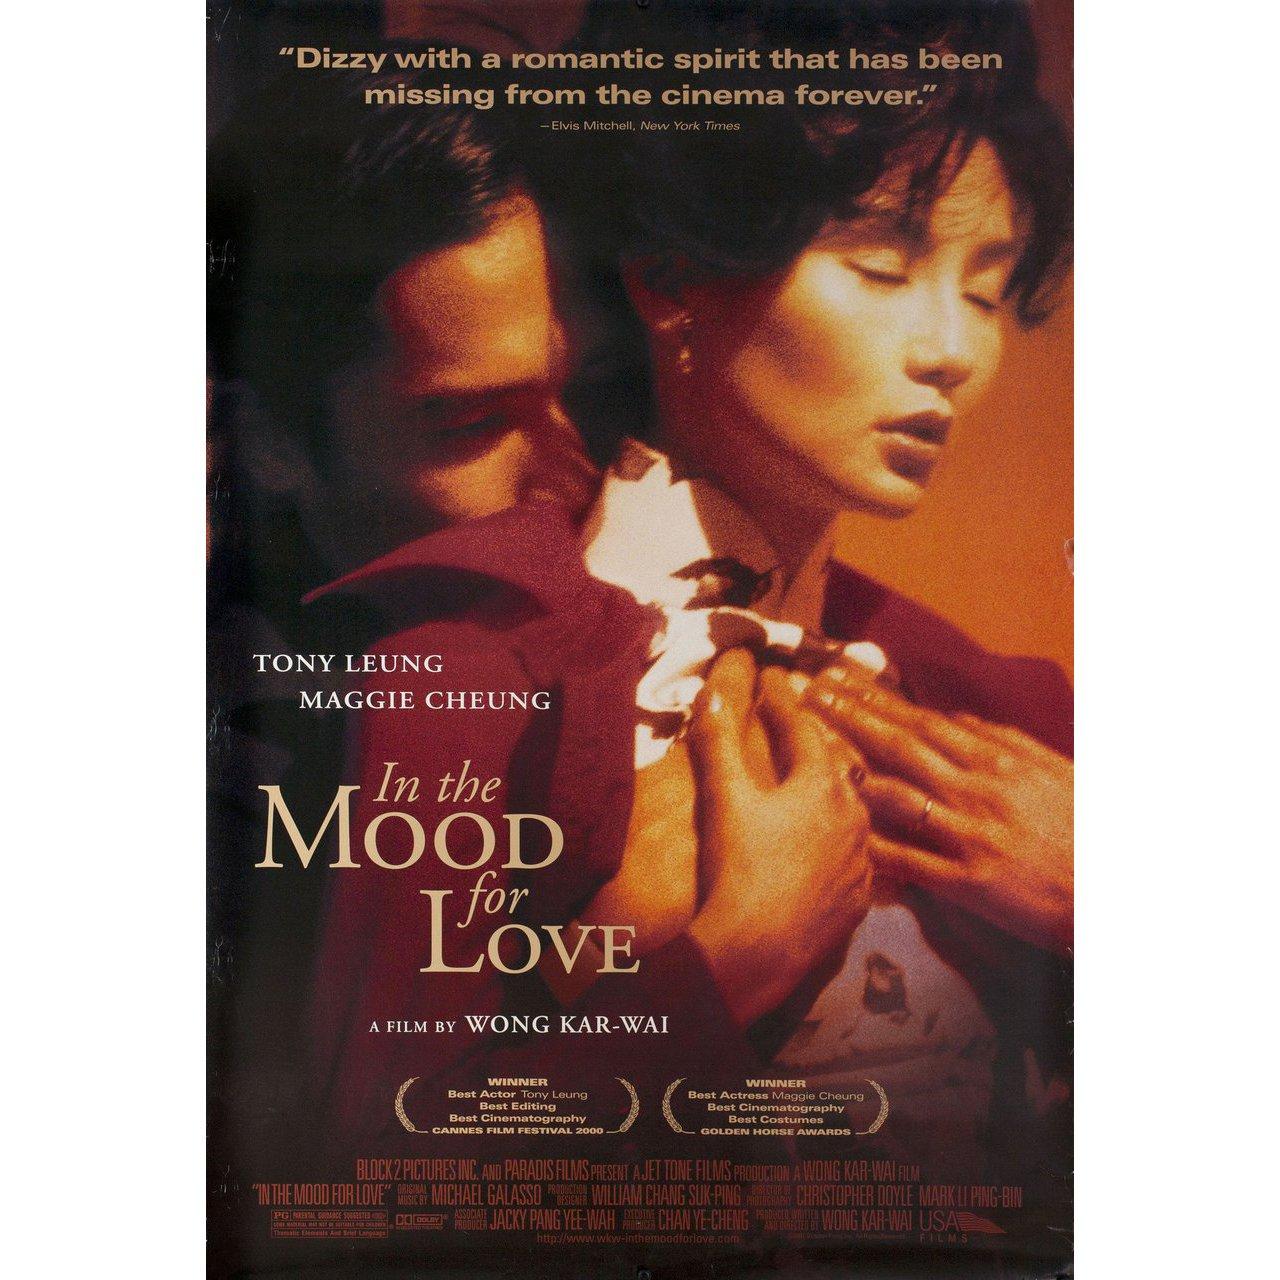 Original 2000 U.S. one sheet poster for the film In the Mood for Love directed by Kar Wai Wong with Maggie Cheung / Tony Chiu Wai Leung / Ping Lam Siu / Tung Cho 'Joe' Cheung. Very good-fine condition, rolled. Please note: the size is stated in